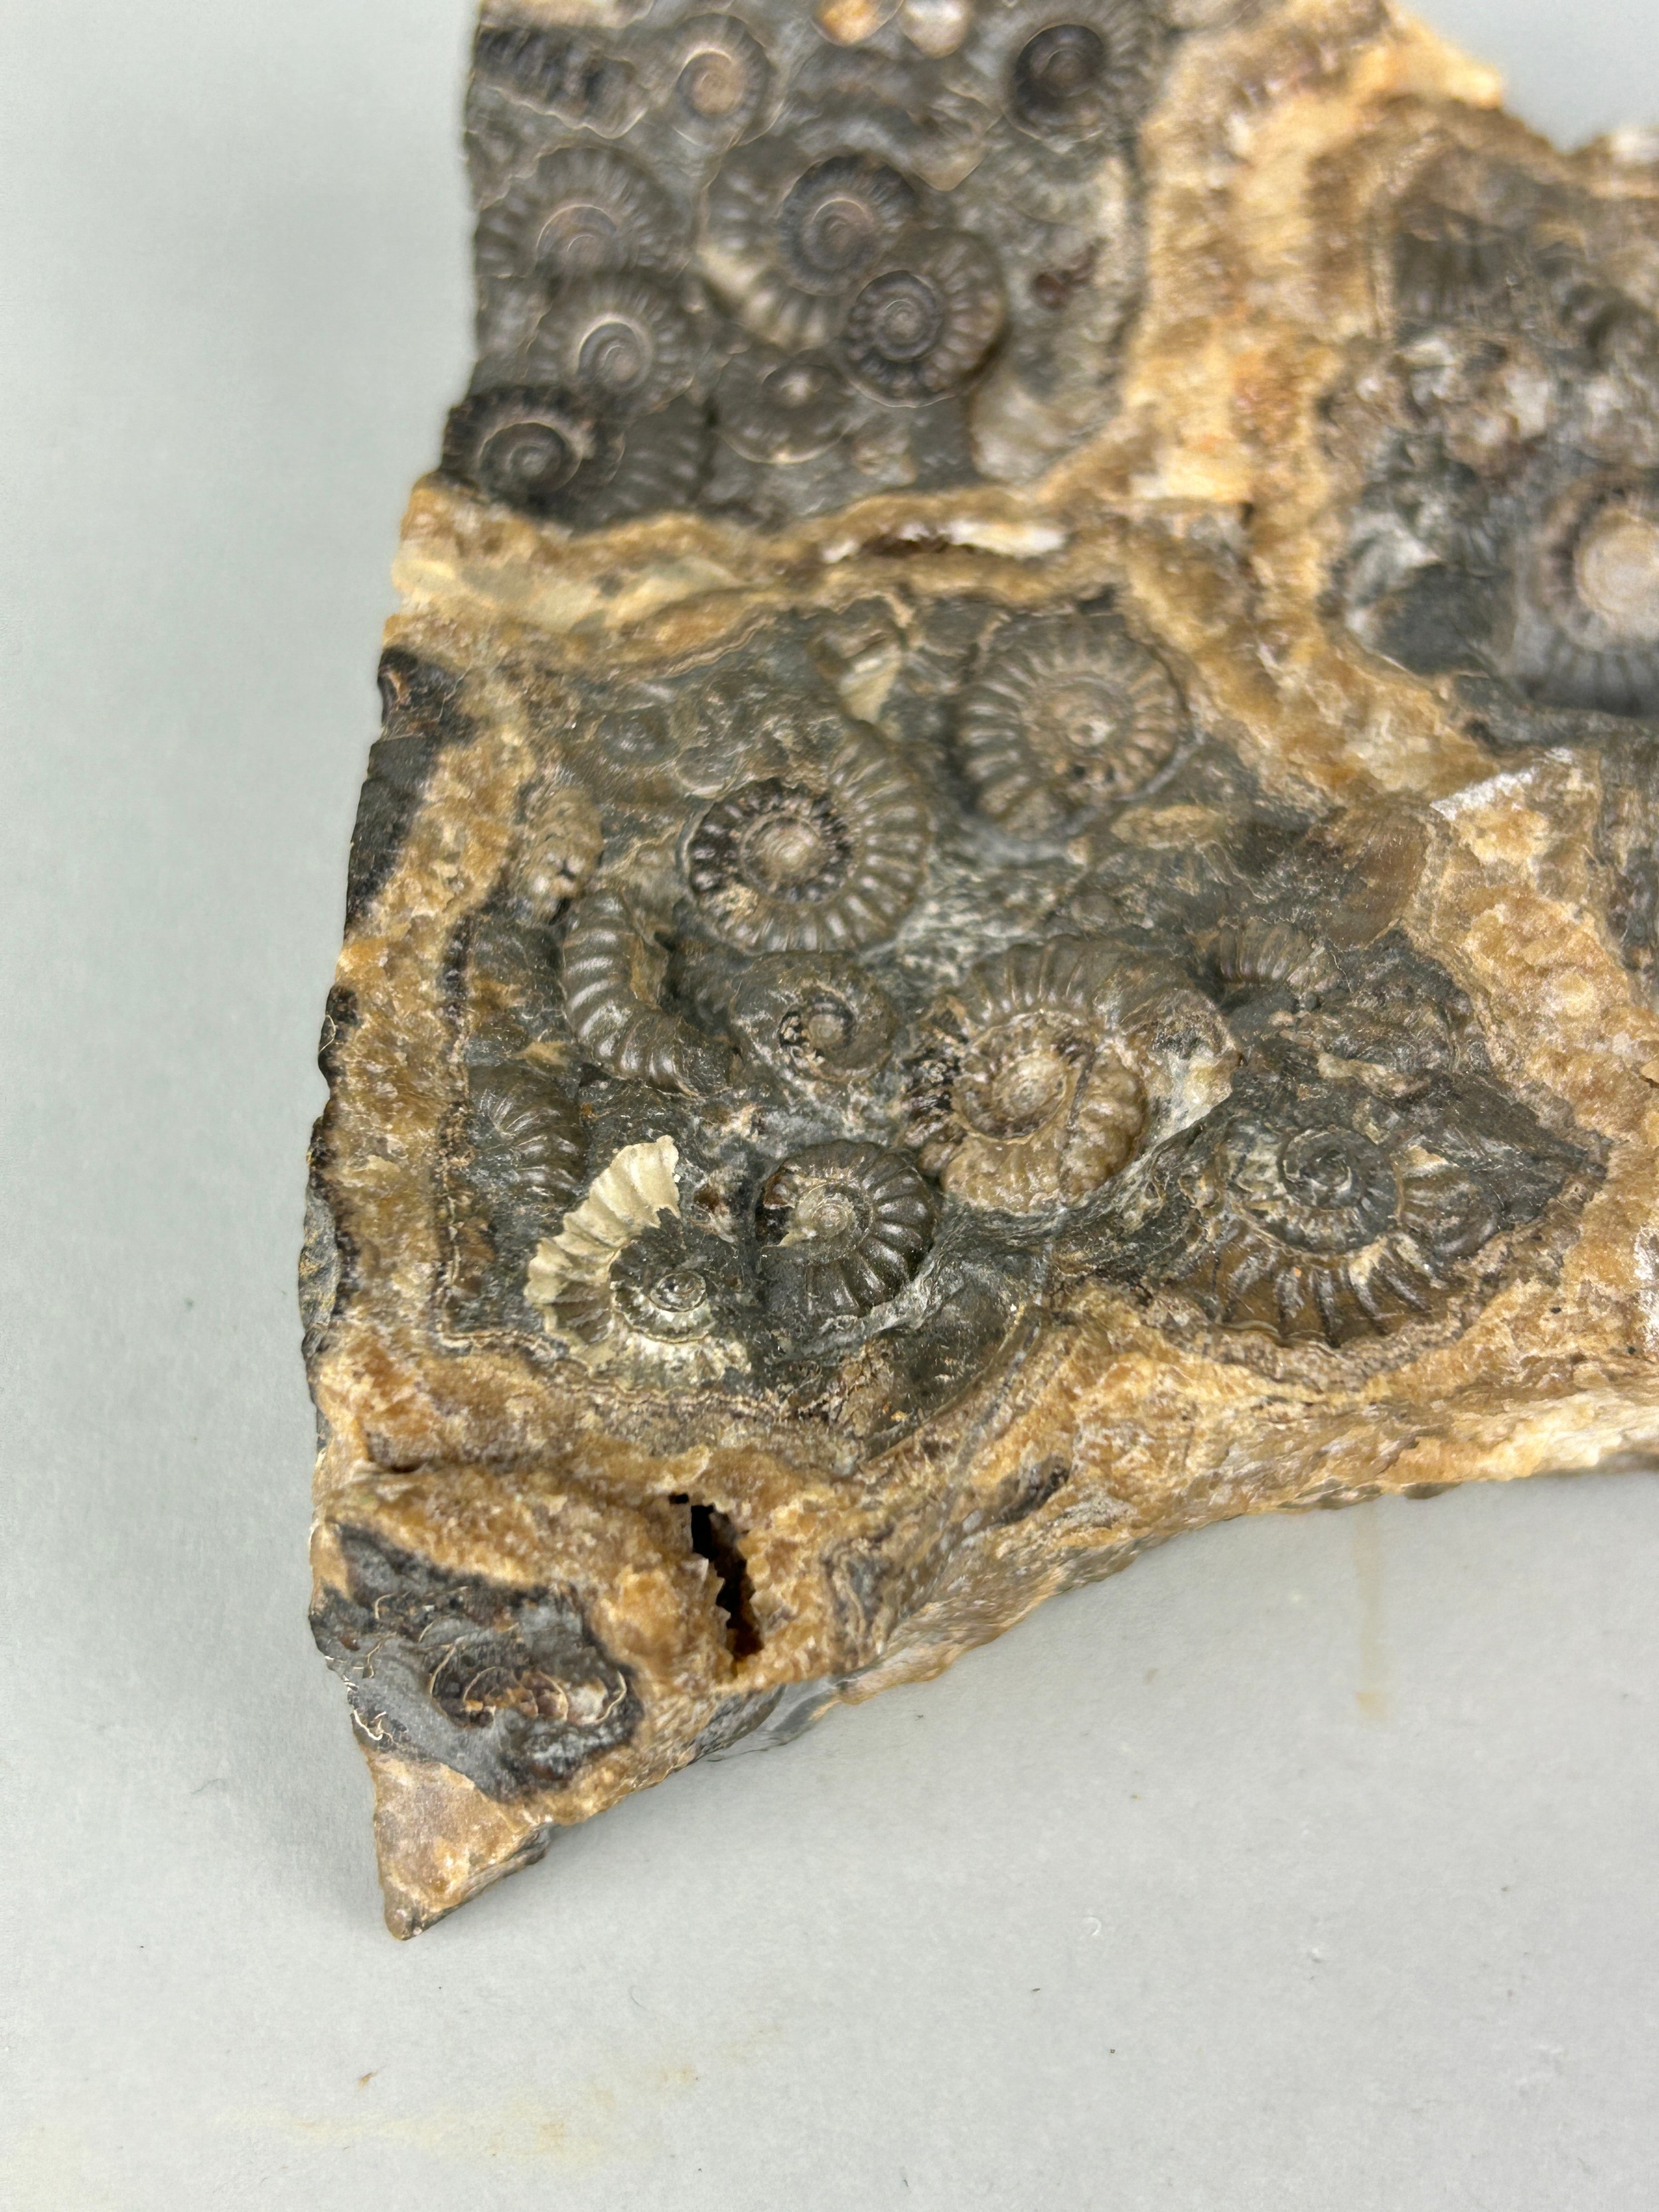 AMMONITE FOSSIL DEATHBED FROM MARSTON MAGNA SOMERSET A fossilised ammonite deathbed from the village - Image 2 of 3